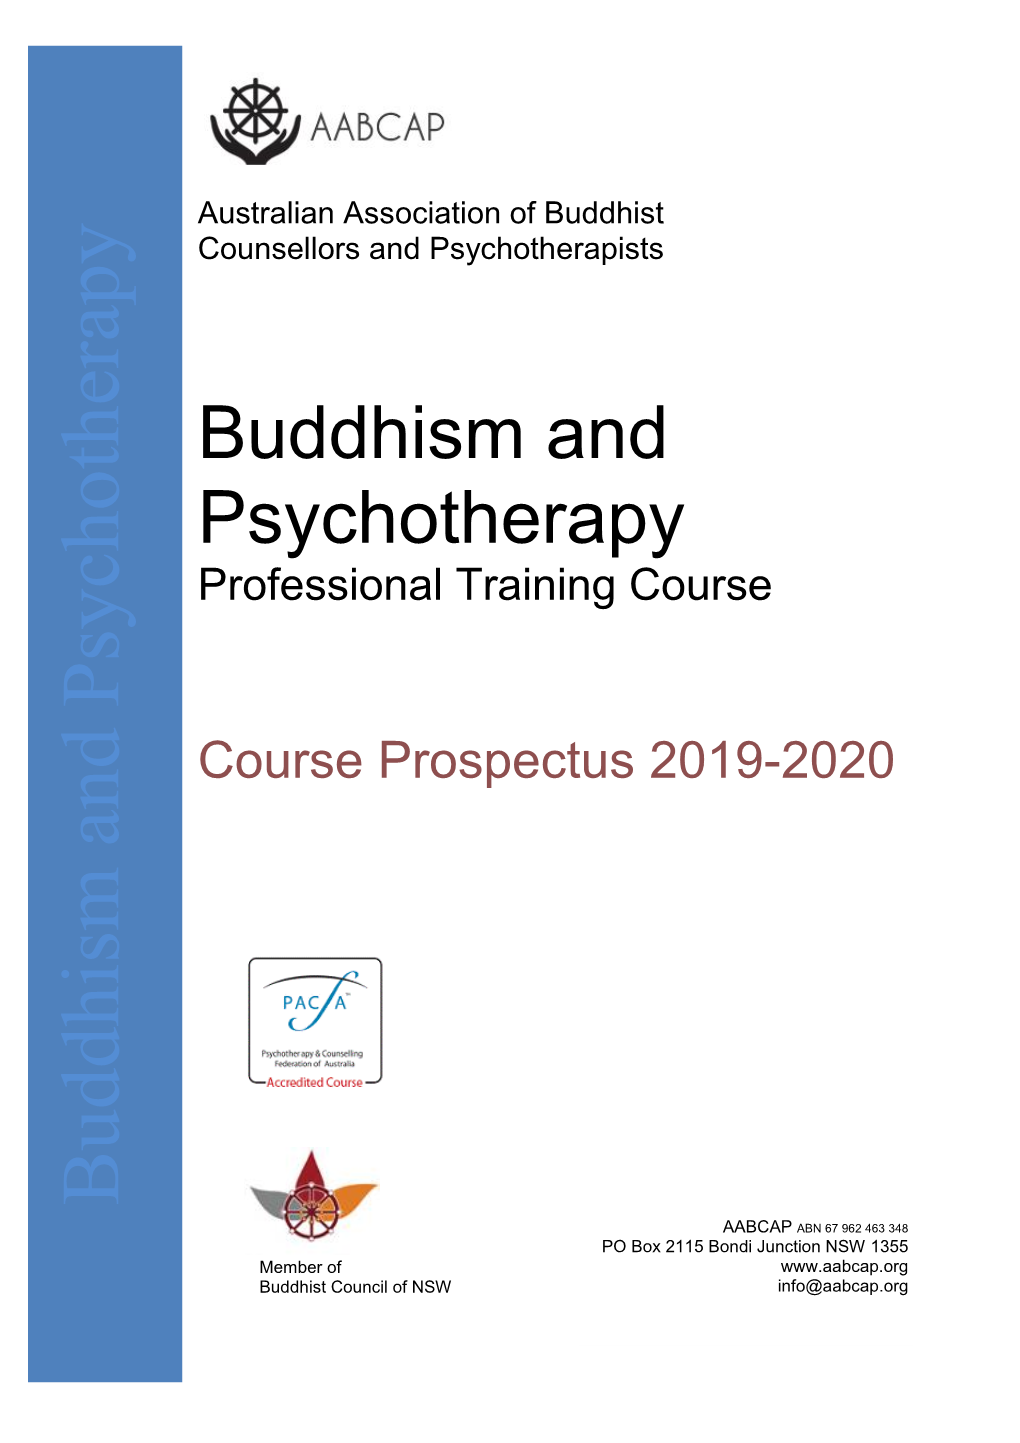 Buddhism and Psychotherapy Professional Training Course